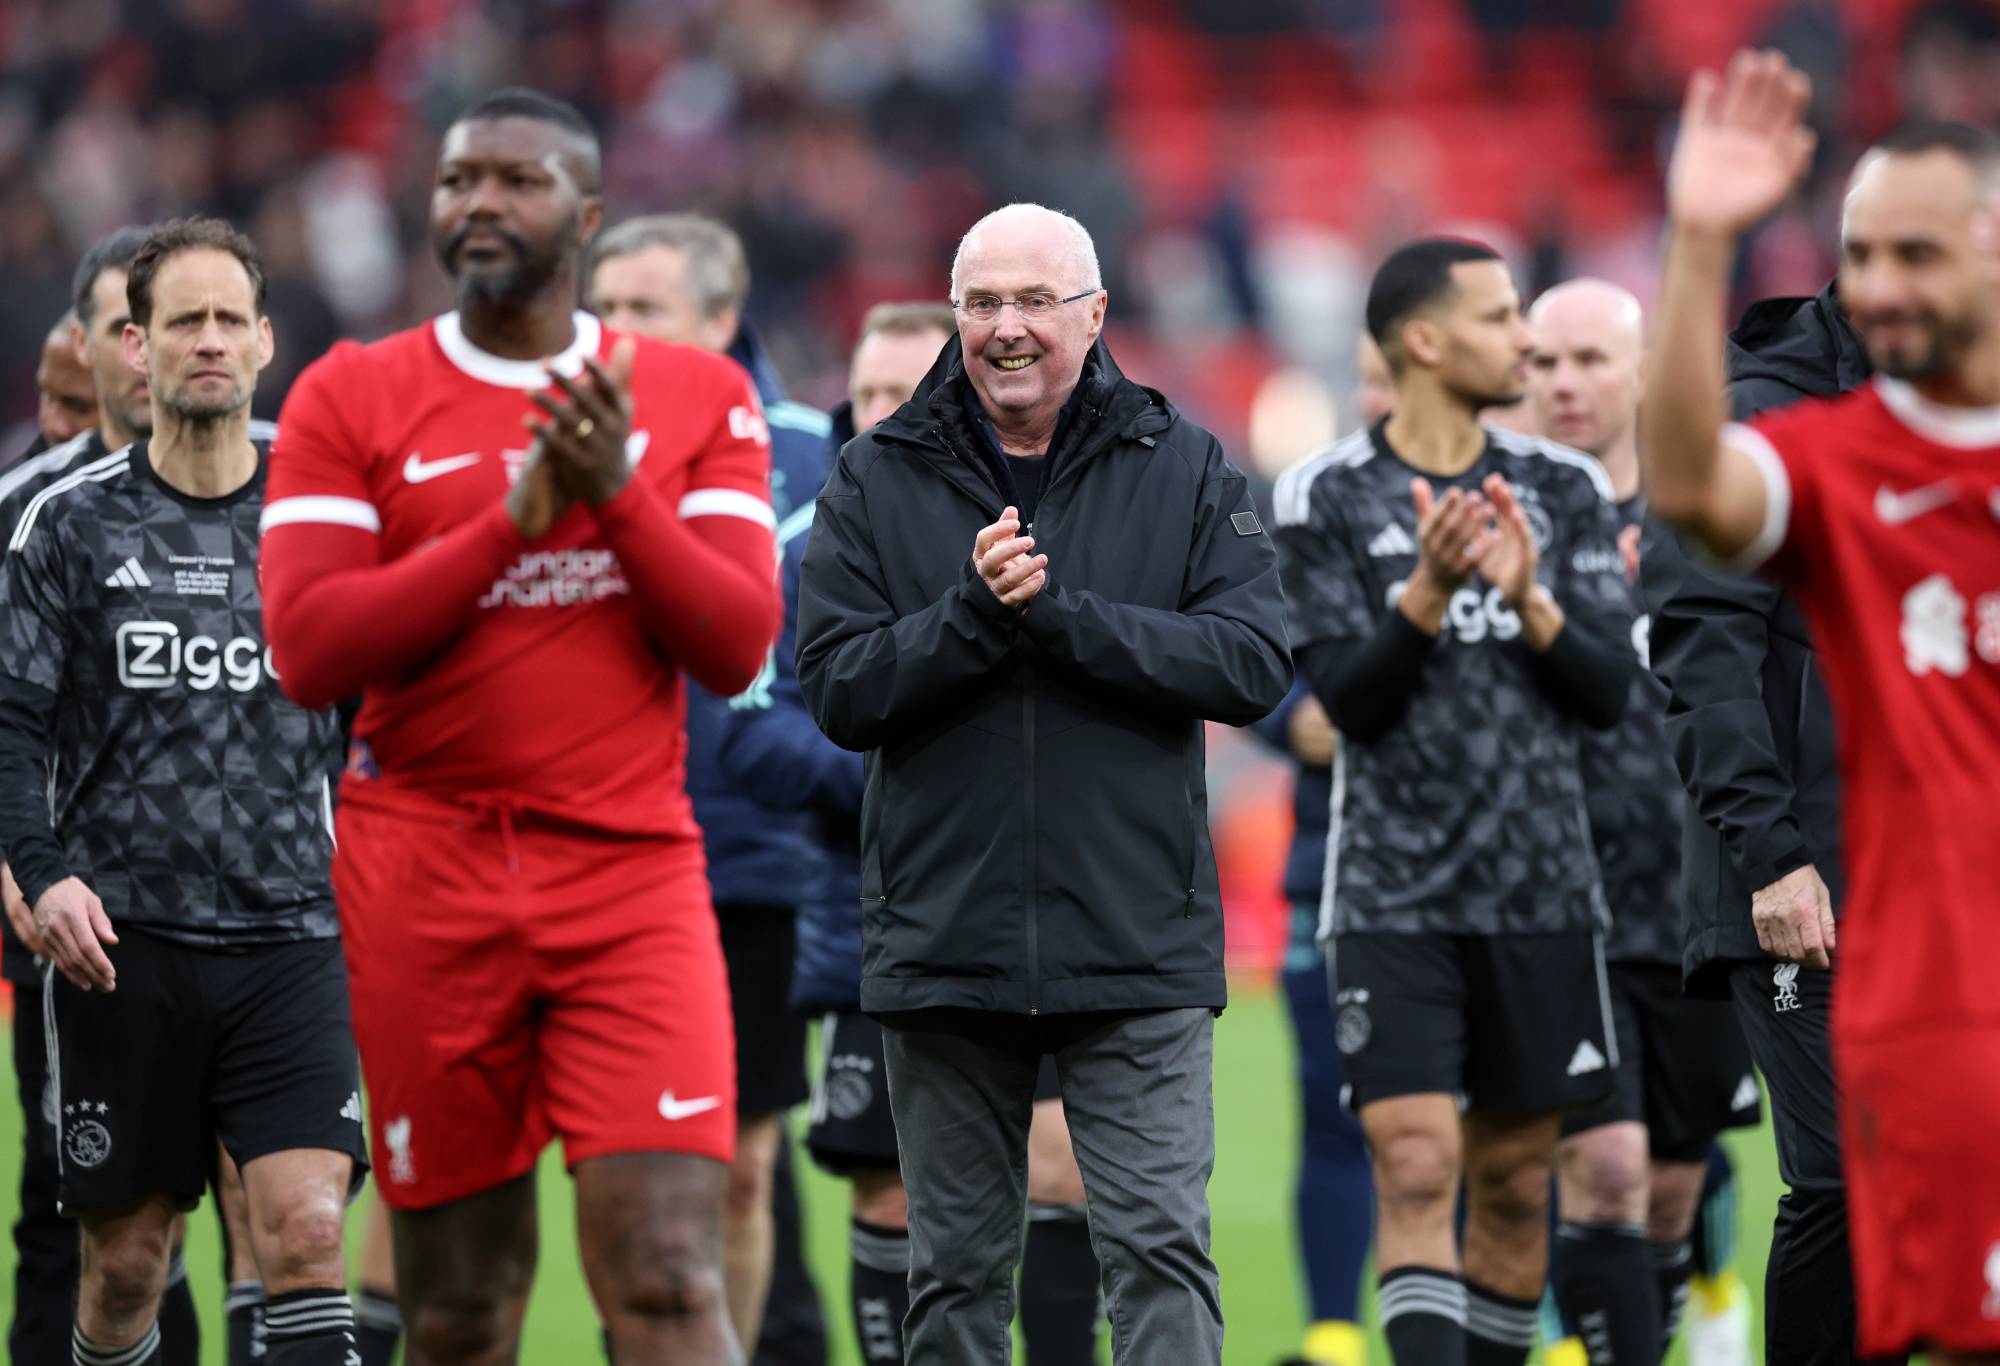 LIVERPOOL, ENGLAND - MARCH 23: Sven-Goran Eriksson, Manager of Liverpool Legends, applauds the fans after the team's victory during the LFC Foundation charity match between Liverpool FC Legends and AFC Ajax Legends at Anfield on March 23, 2024 in Liverpool, England. (Photo by Clive Brunskill/Getty Images)